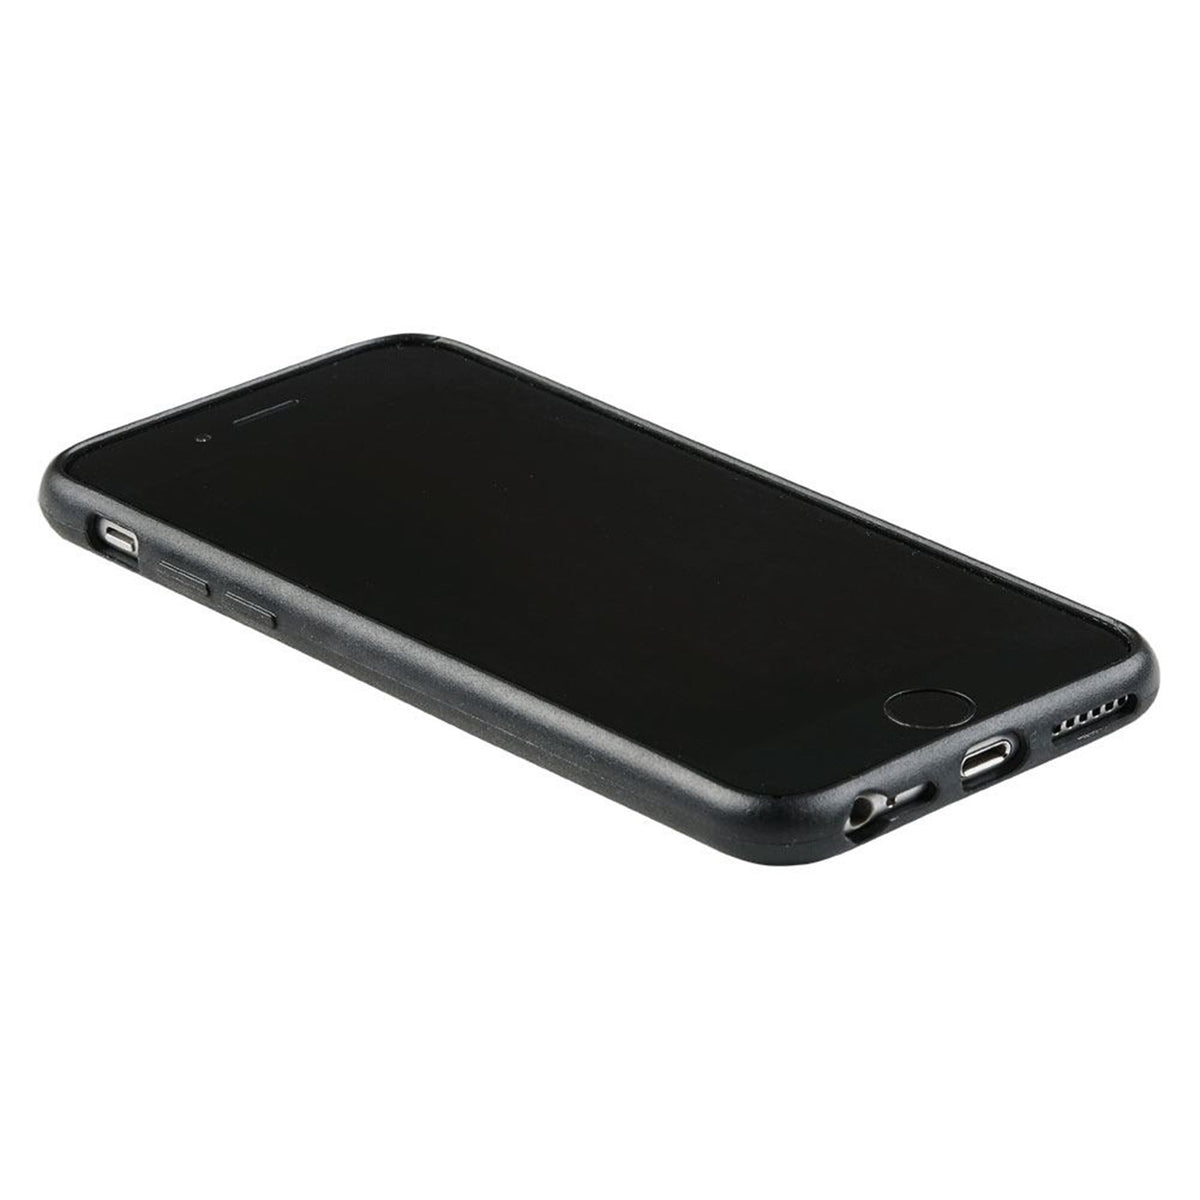 GreyLime-iPhone-6-7-8-Plus-biodegradable-cover-Black-COIP678P01-V3.jpg